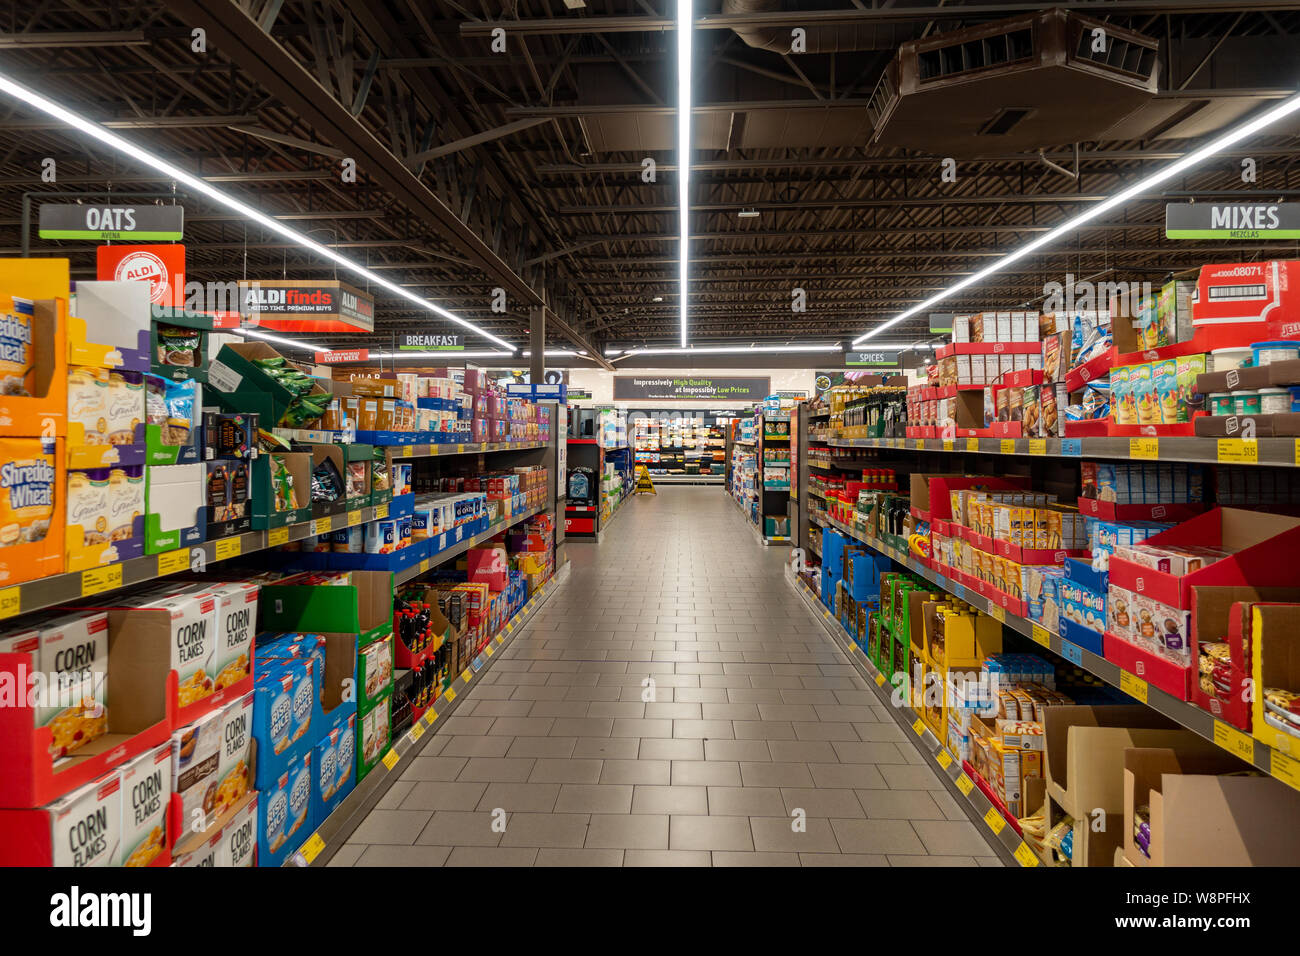 Ft. Pierce,FL/USA-810/19: The cereal and cake or dessert mix aisle of an Aldi store. Stock Photo